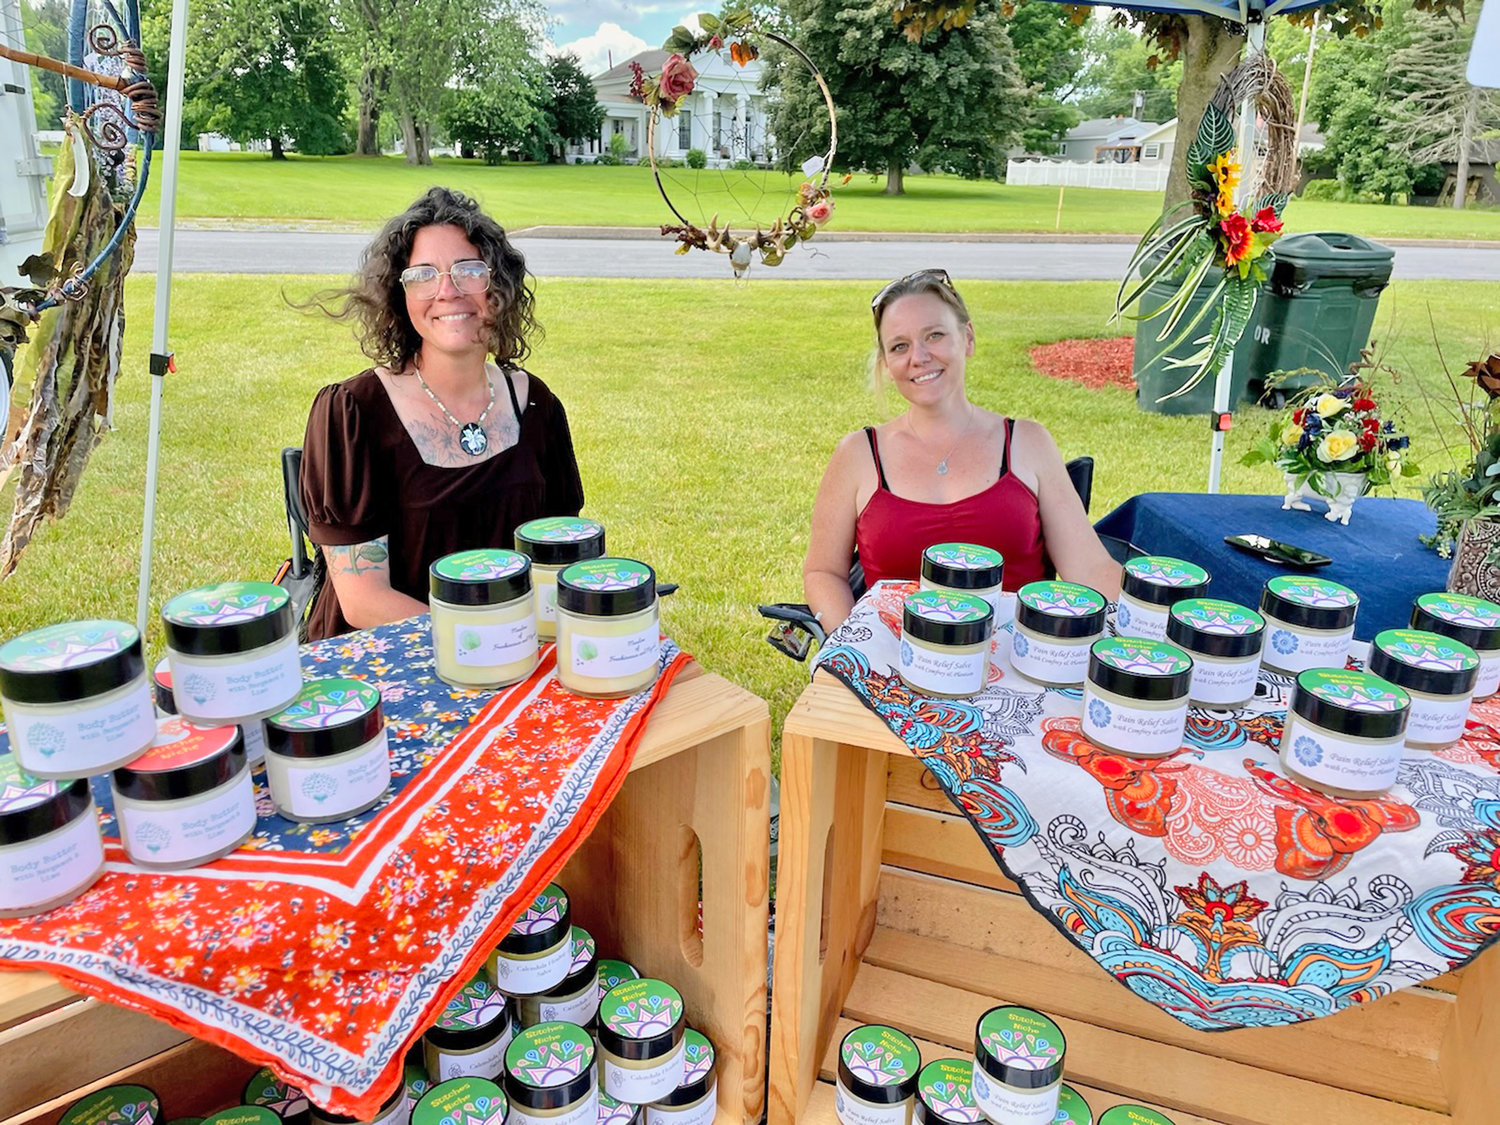 Danielle Magnitzky, left, of Forestport, and friend Kelly Fletcher, of Deerfield, of Stitches Niche, are ready to sell body butters, pain relievers, dream catchers and an assortment of crafts items at the first Oriskany Farmers Market Wednesday.